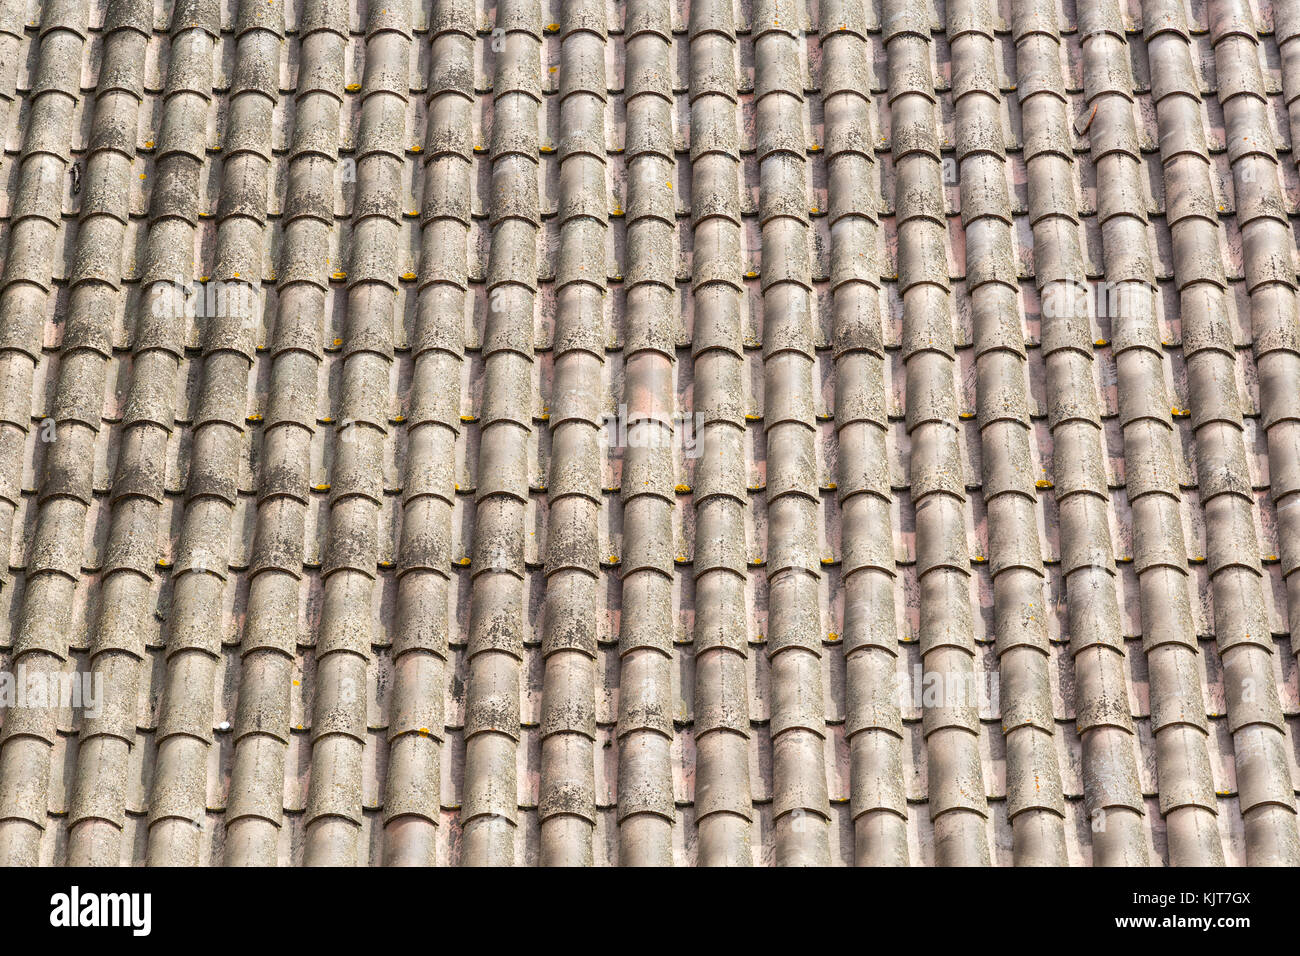 Dirty weathered roof tiles Stock Photo